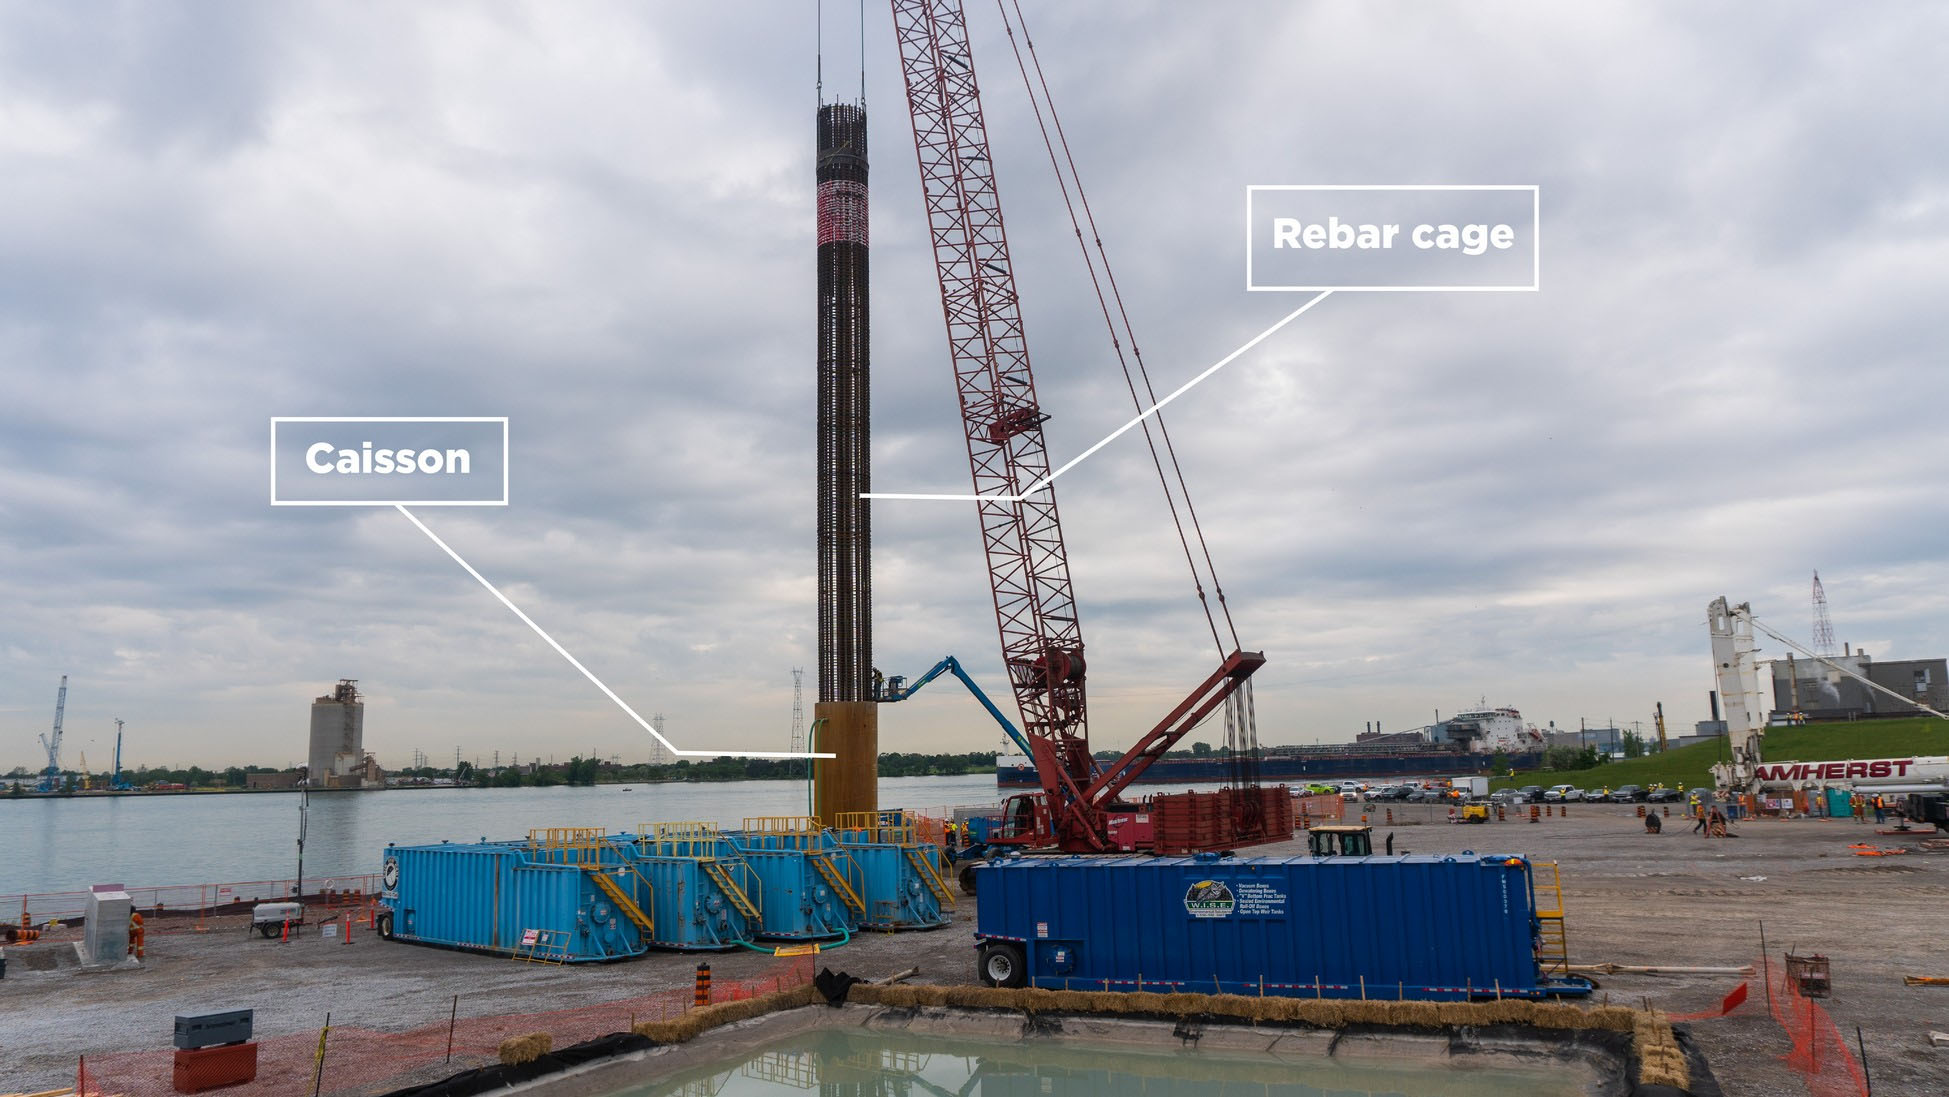 Photo of a test shaft with the Caisson and Rebar Cage labeled. 